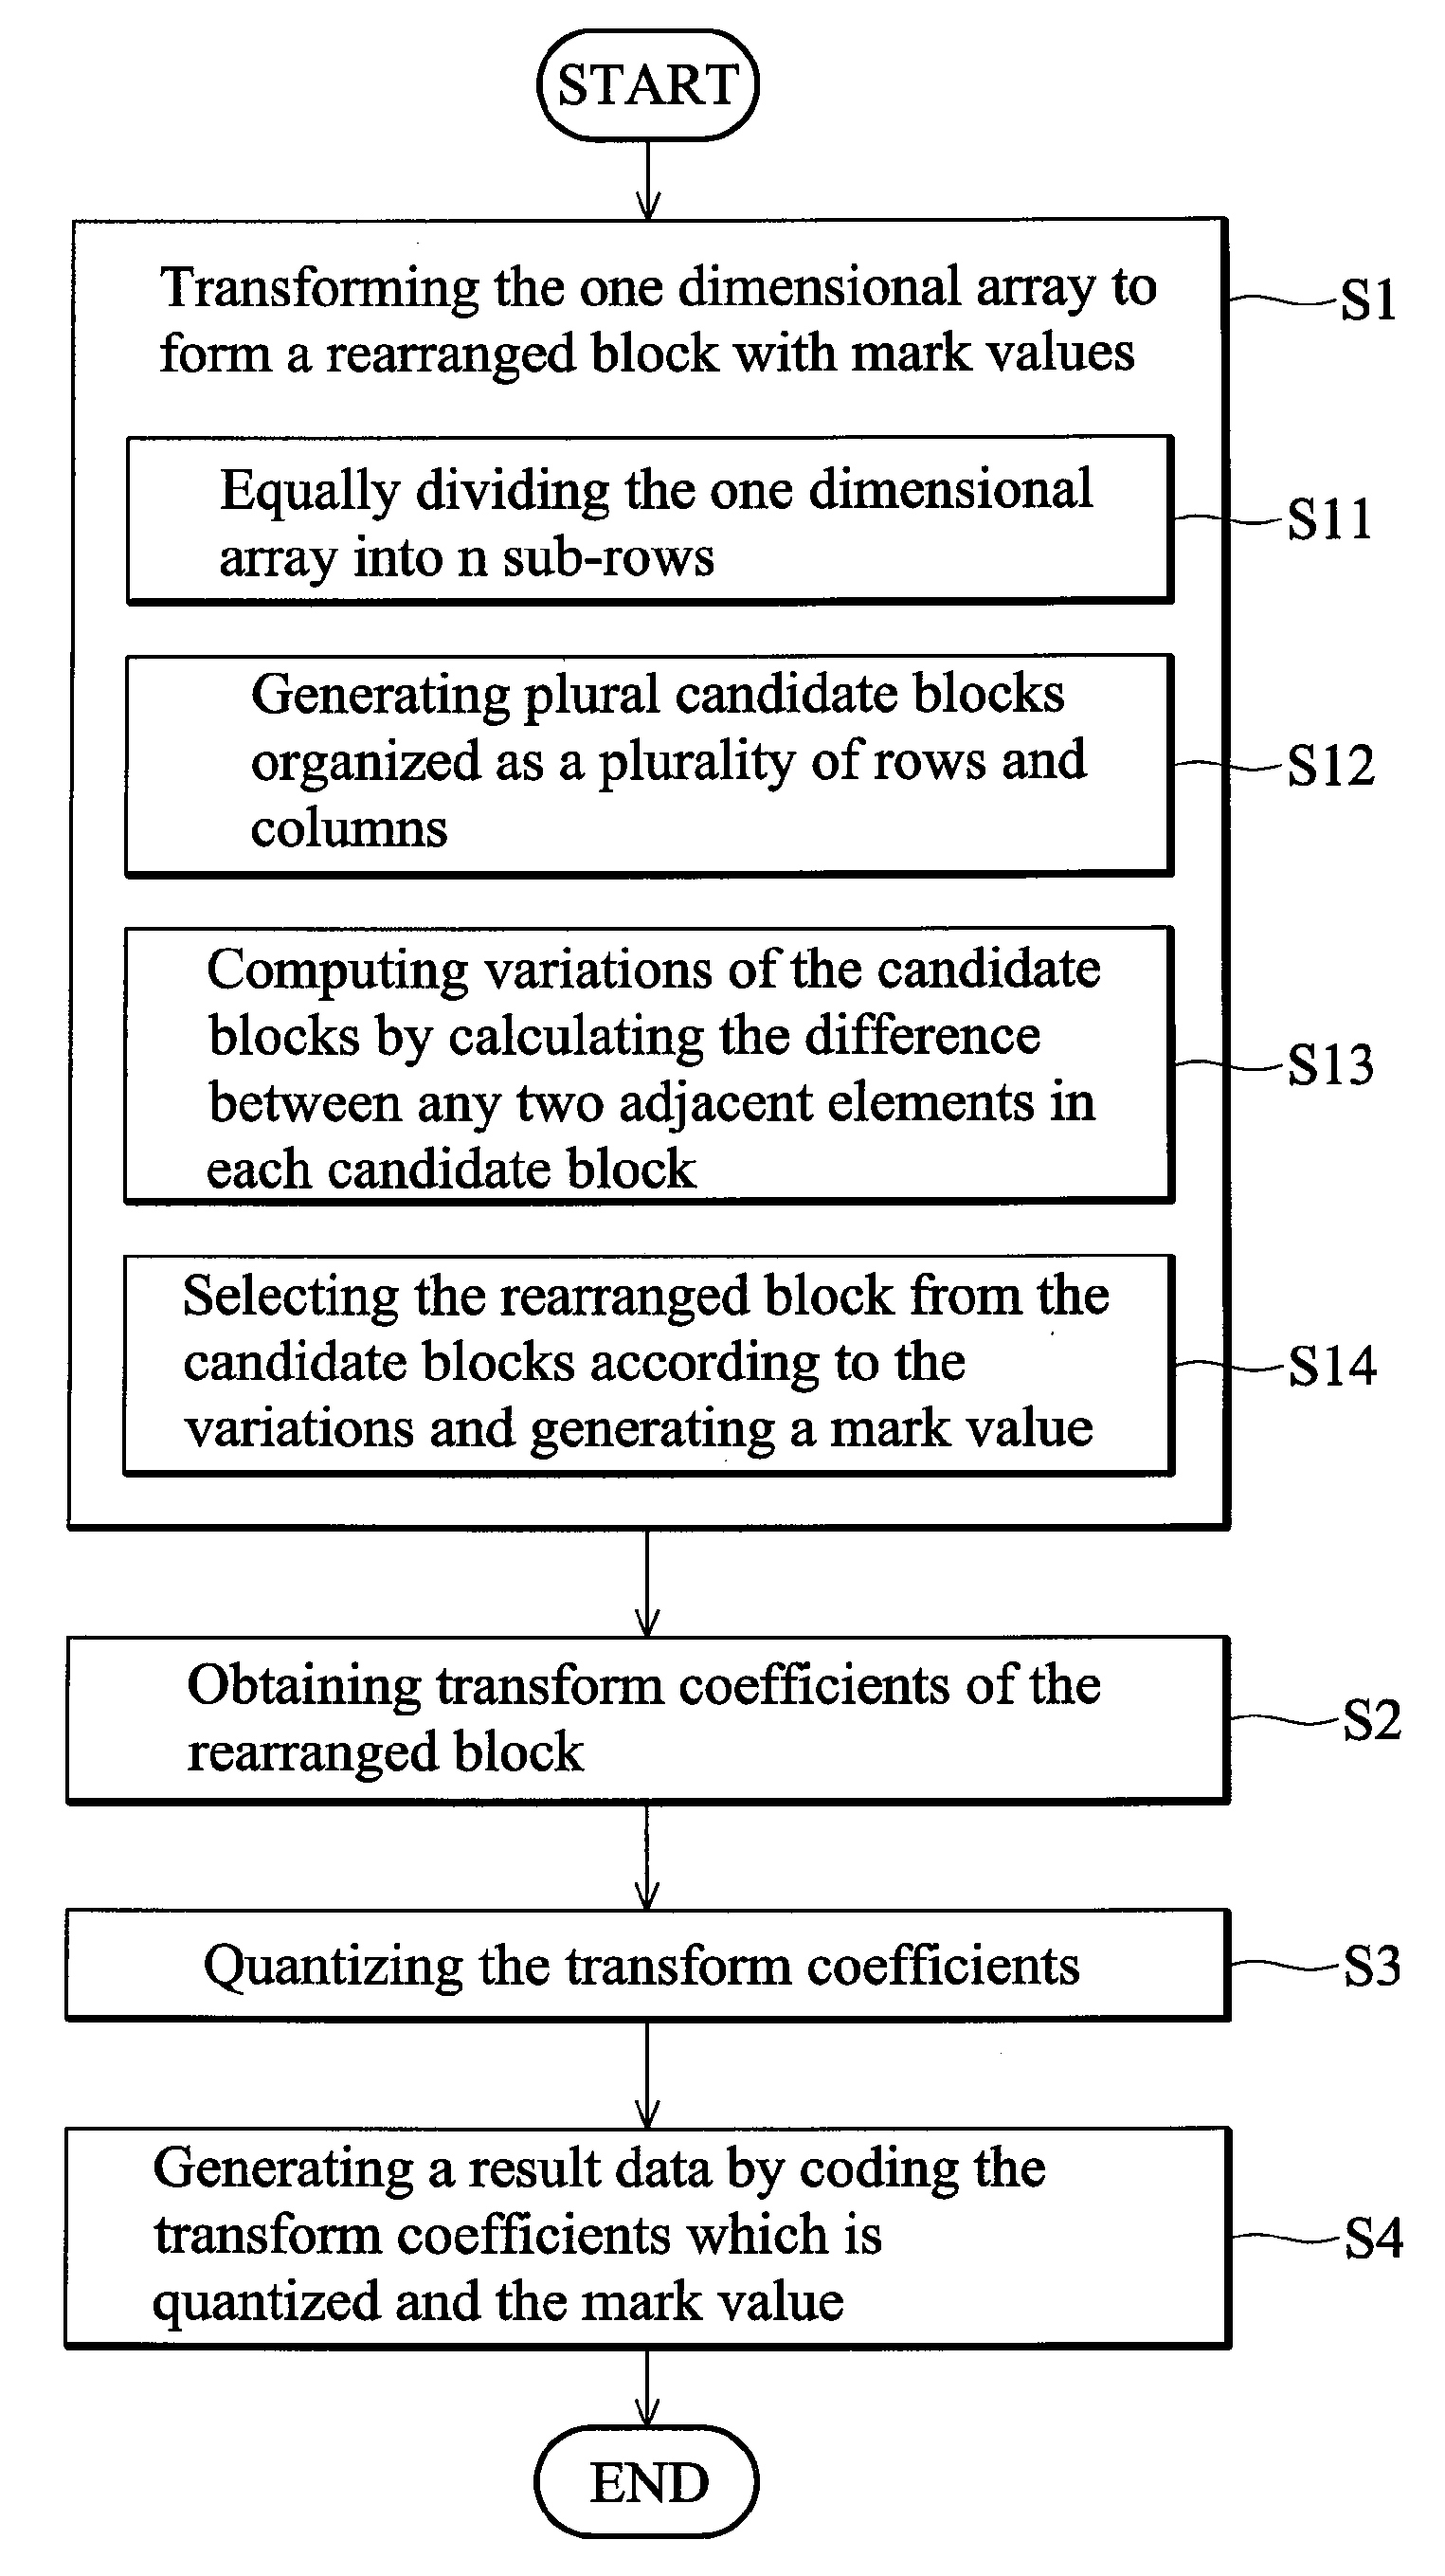 Apparatus of compressing image data and a method thereof